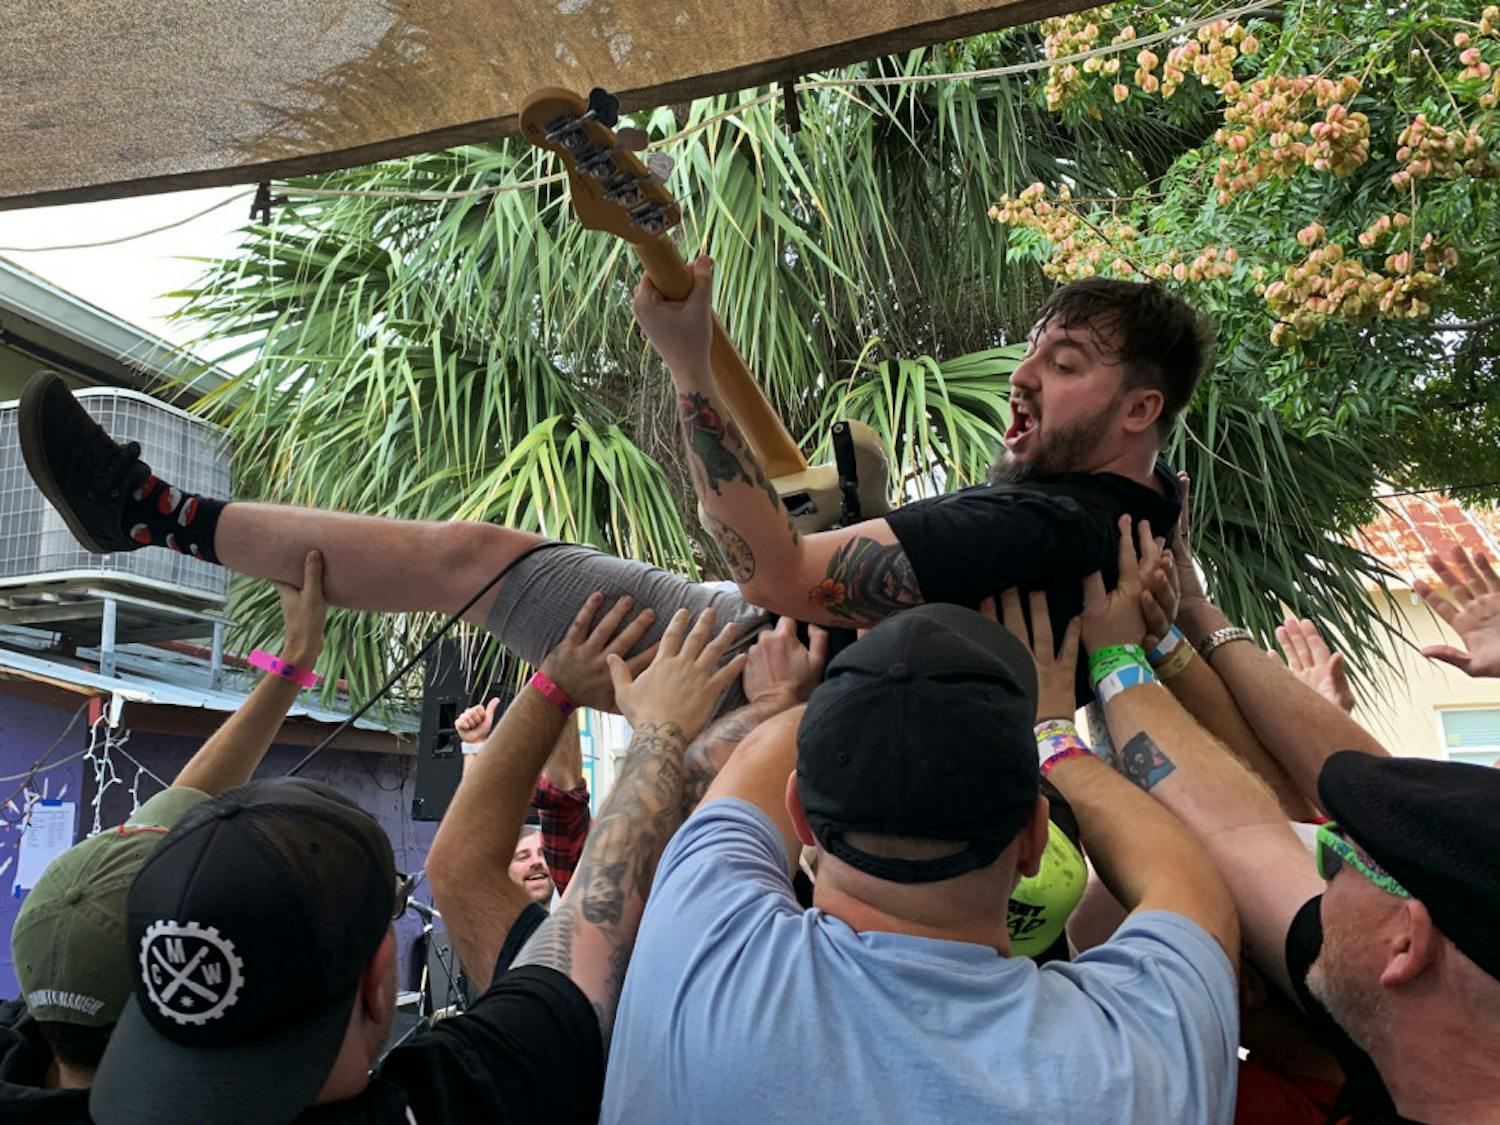 Bobby Edge, vocalist and bass player for the band Jukebox Romantics, crowd surfs during the middle of his set at the Civic Media Center. “Honestly, my favorite thing is seeing all these faces I’ve seen from different countries come here and we all hang out,” Edge said. “Everyone’s in this one central location and it’s f***king amazing.”